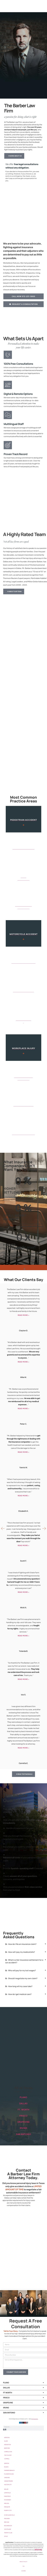 The Barber Law Firm - Plano TX Lawyers